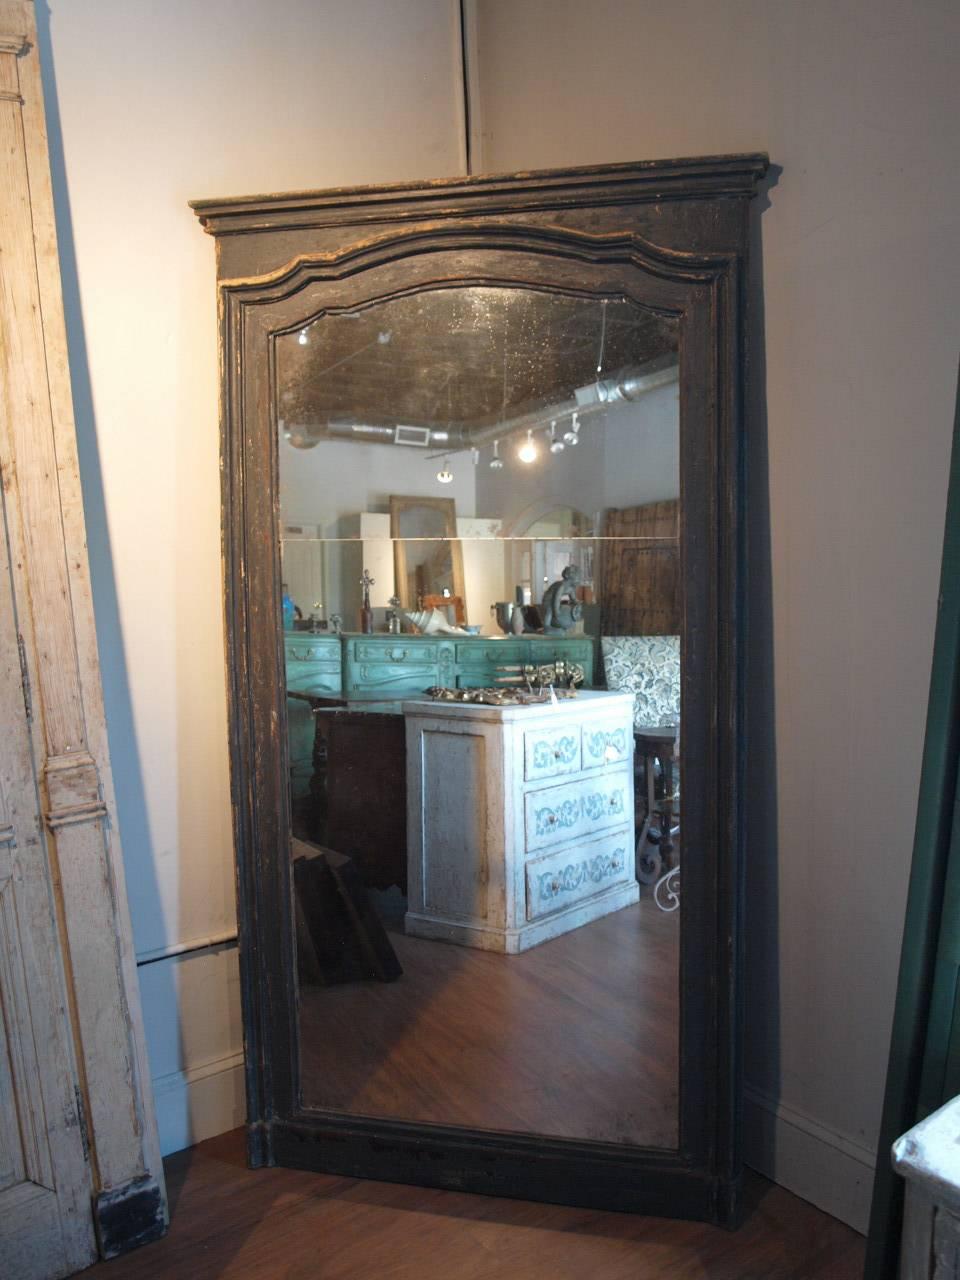 A very handsome large scale trumeau mirror created from an 18th century Italian door frame. Wonderful molding with a beautiful painted finish. Terrific whether mounted to the wall or propped against the wall.